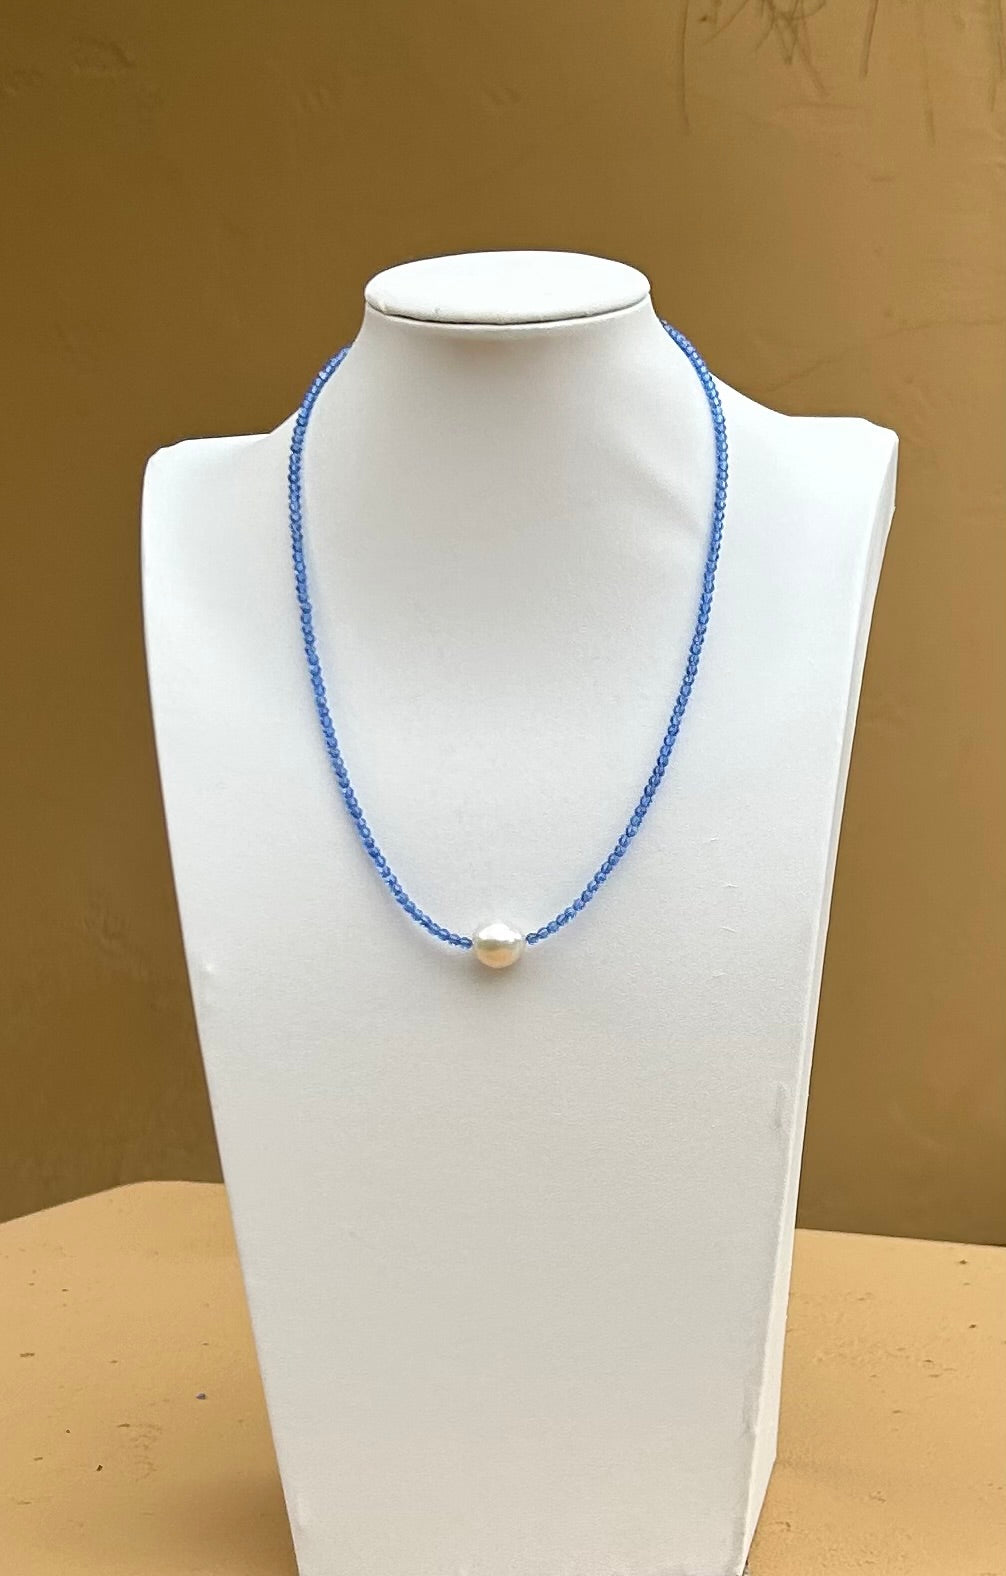 Necklace - 3mm Sapphire blue Swarovski crystals with a large white pearl and silver toggle